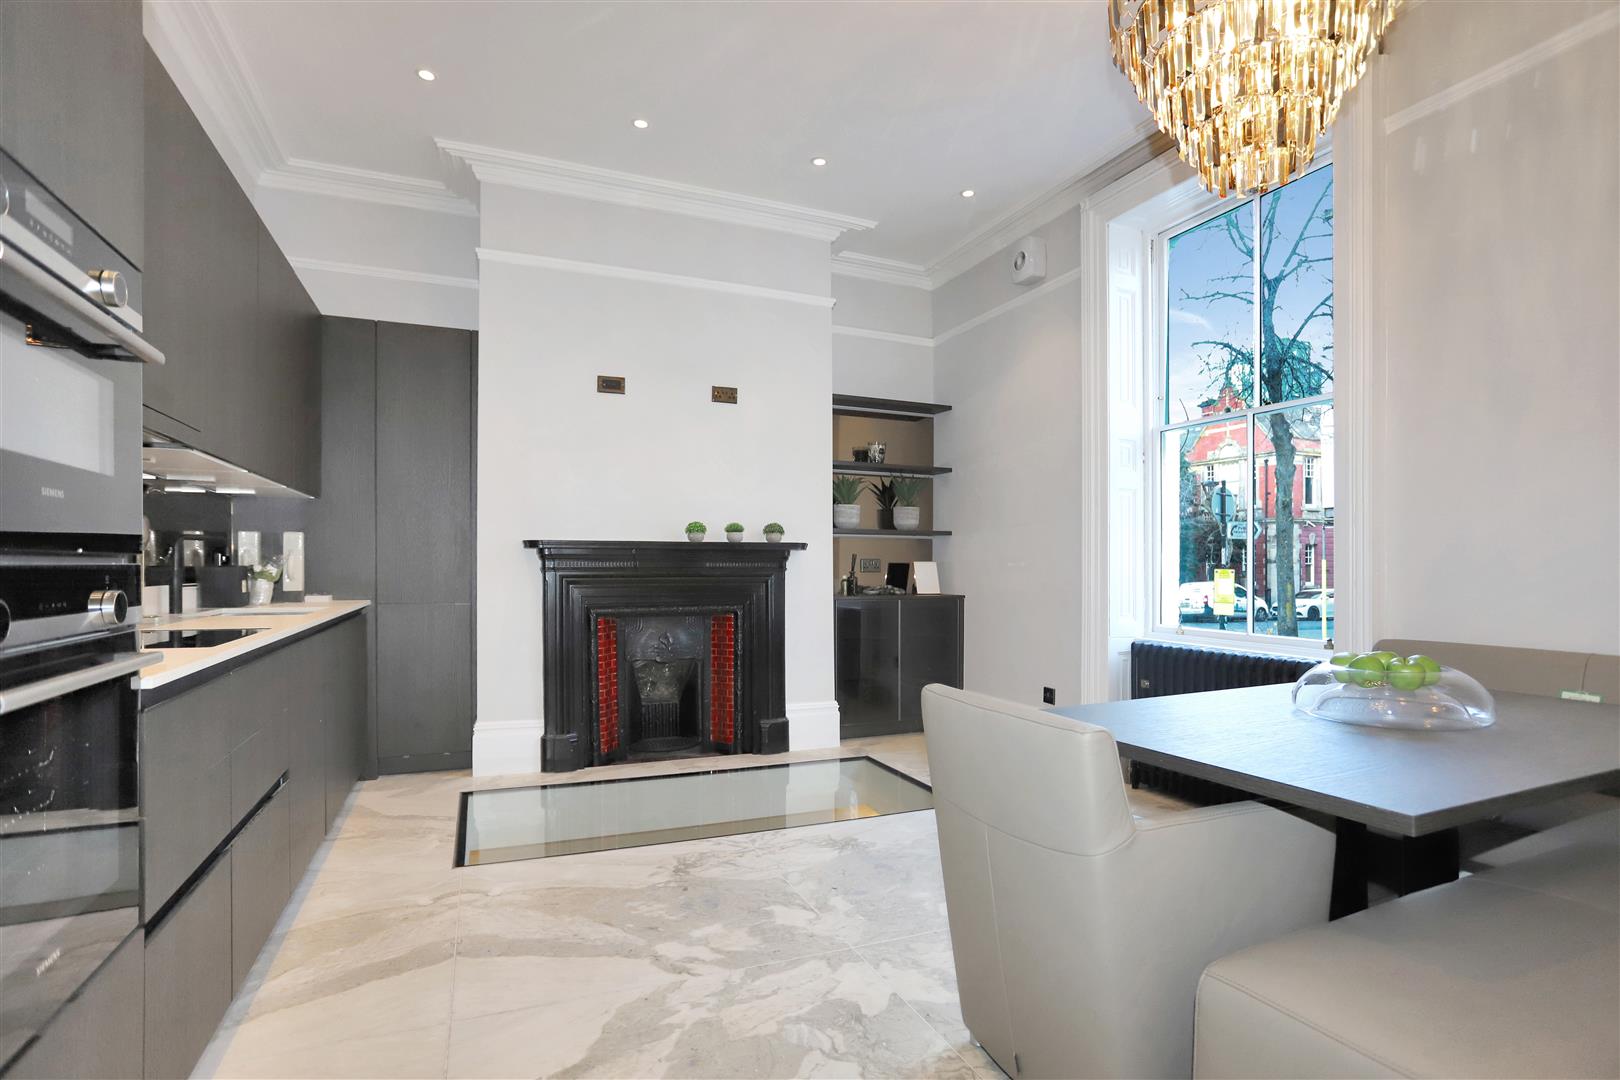 A contemporary kitchen with original fireplace inside a Greater Manchester townhouse